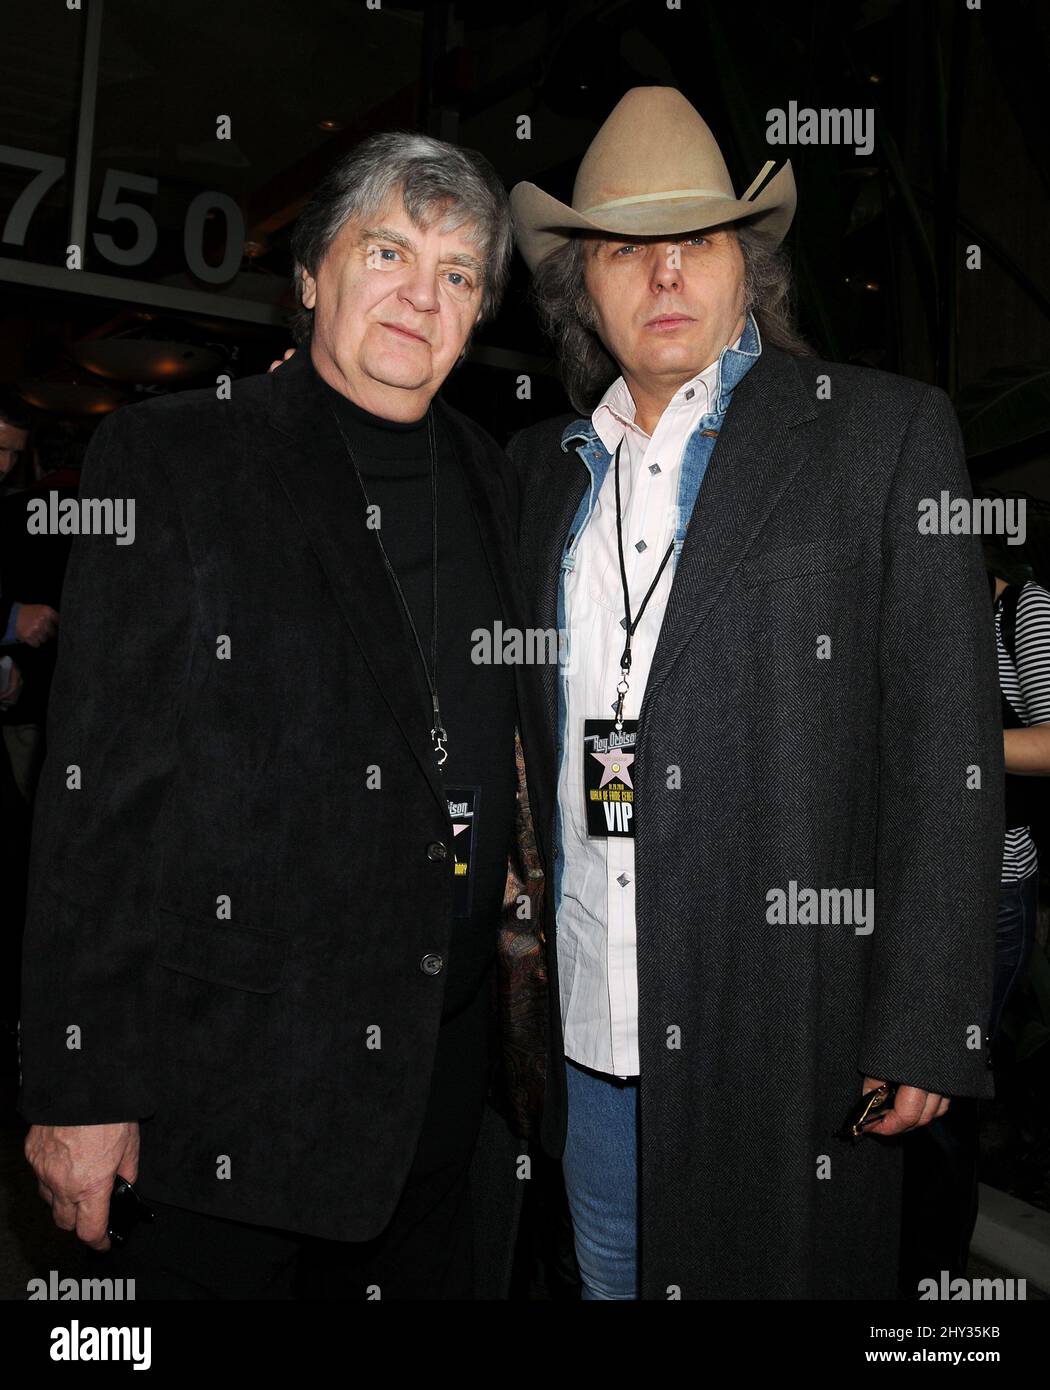 Phil Everly (left) and Dwight Yoakam at the event as Roy Orbison is Honored Posthumously with a Star on the Hollywood Walk of Fame Stock Photo